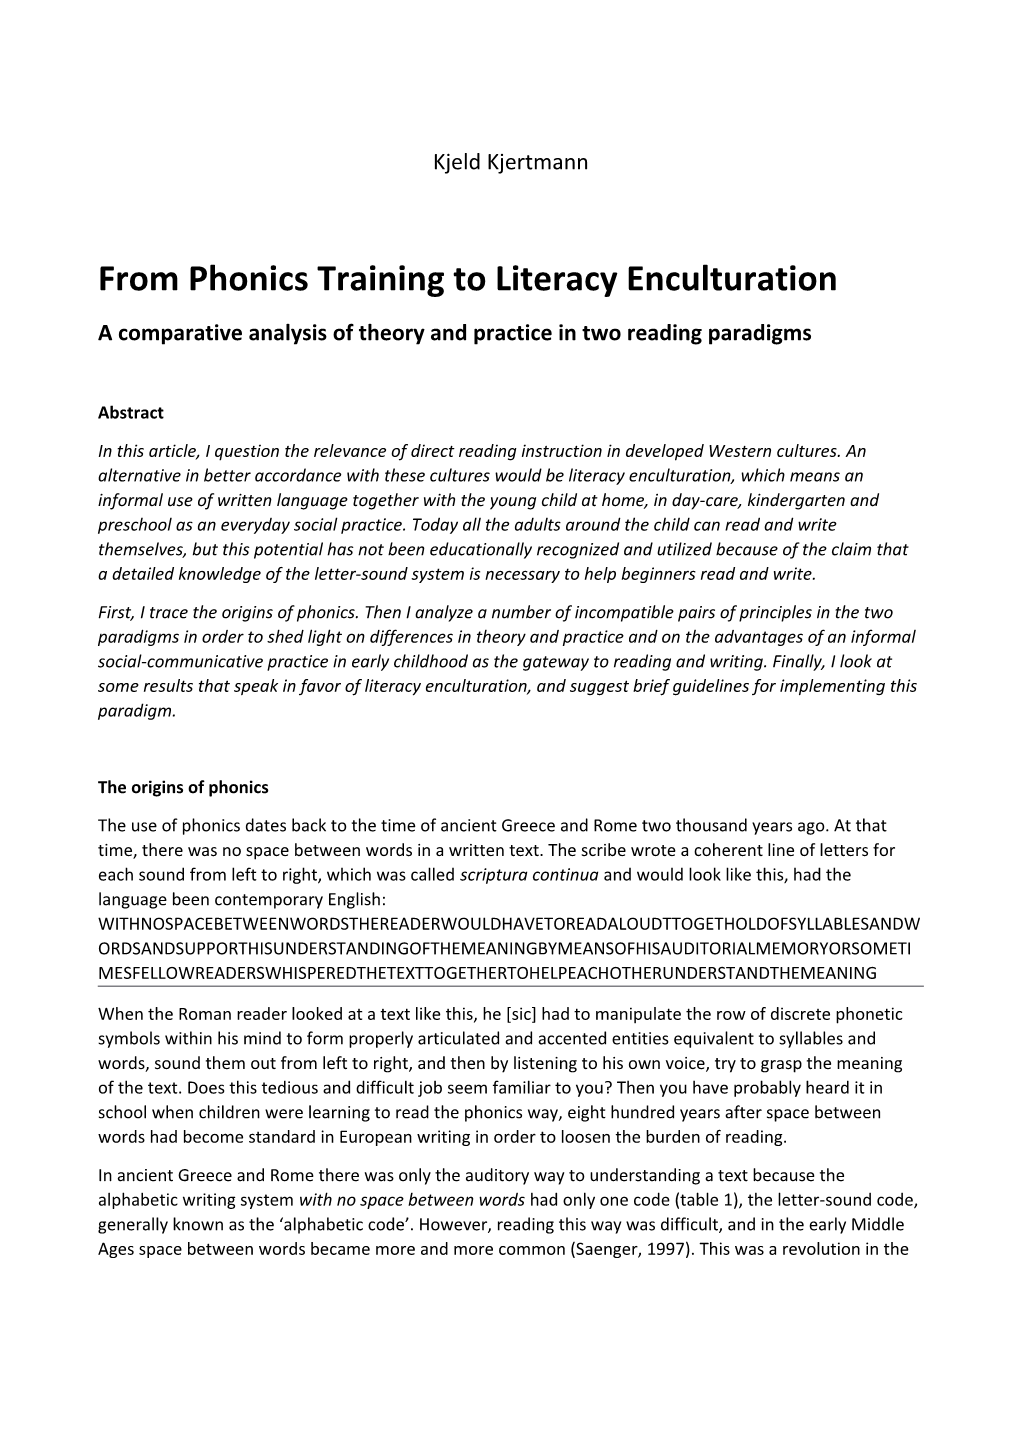 From Phonics Training to Literacy Enculturation